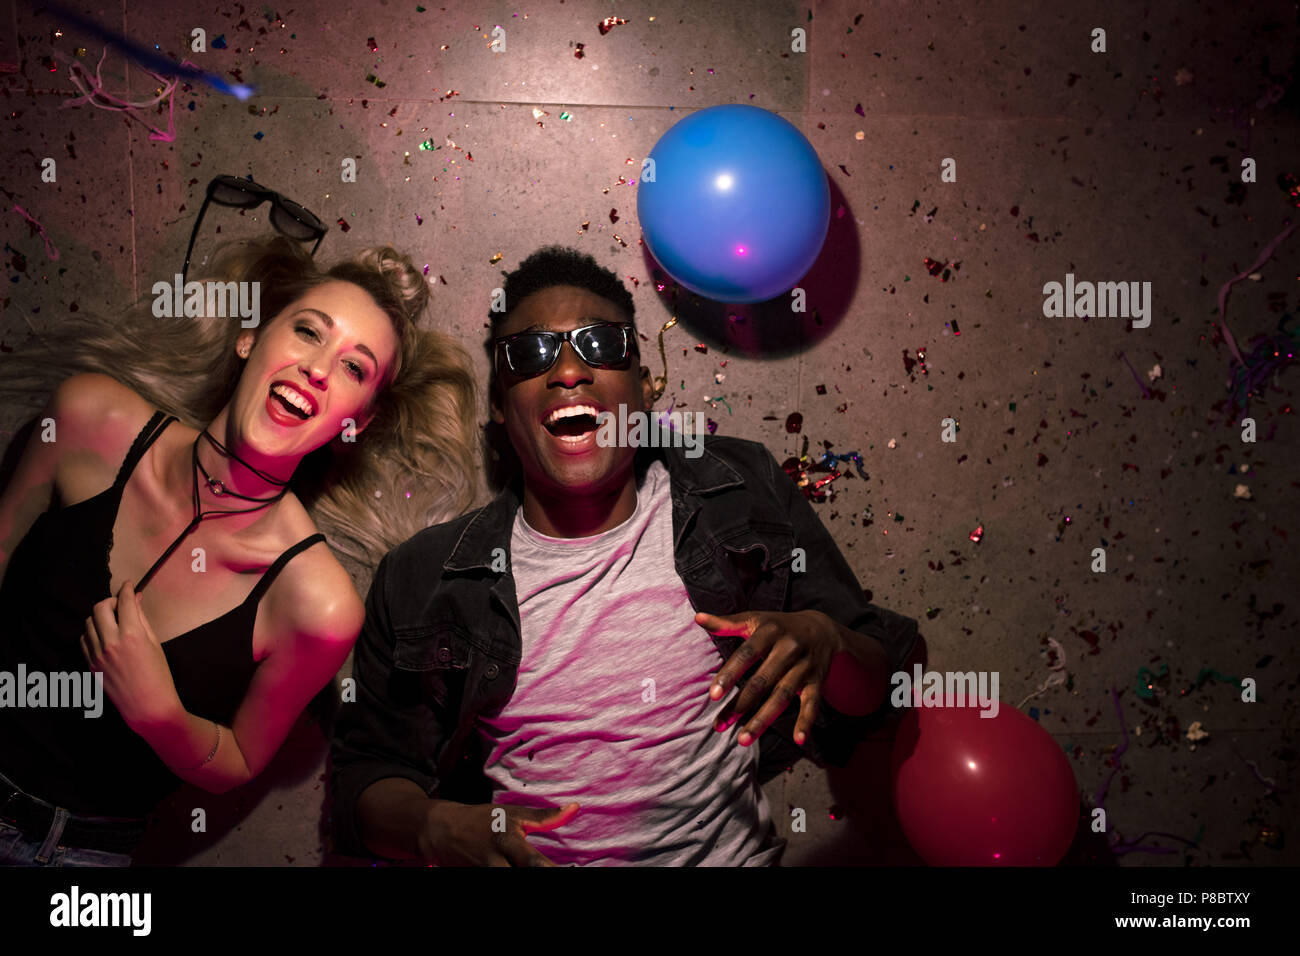 Top view of man and woman lying on floor and laughing at a house party. Tired friends lying on floor at the house party with balloons and confetti aro Stock Photo